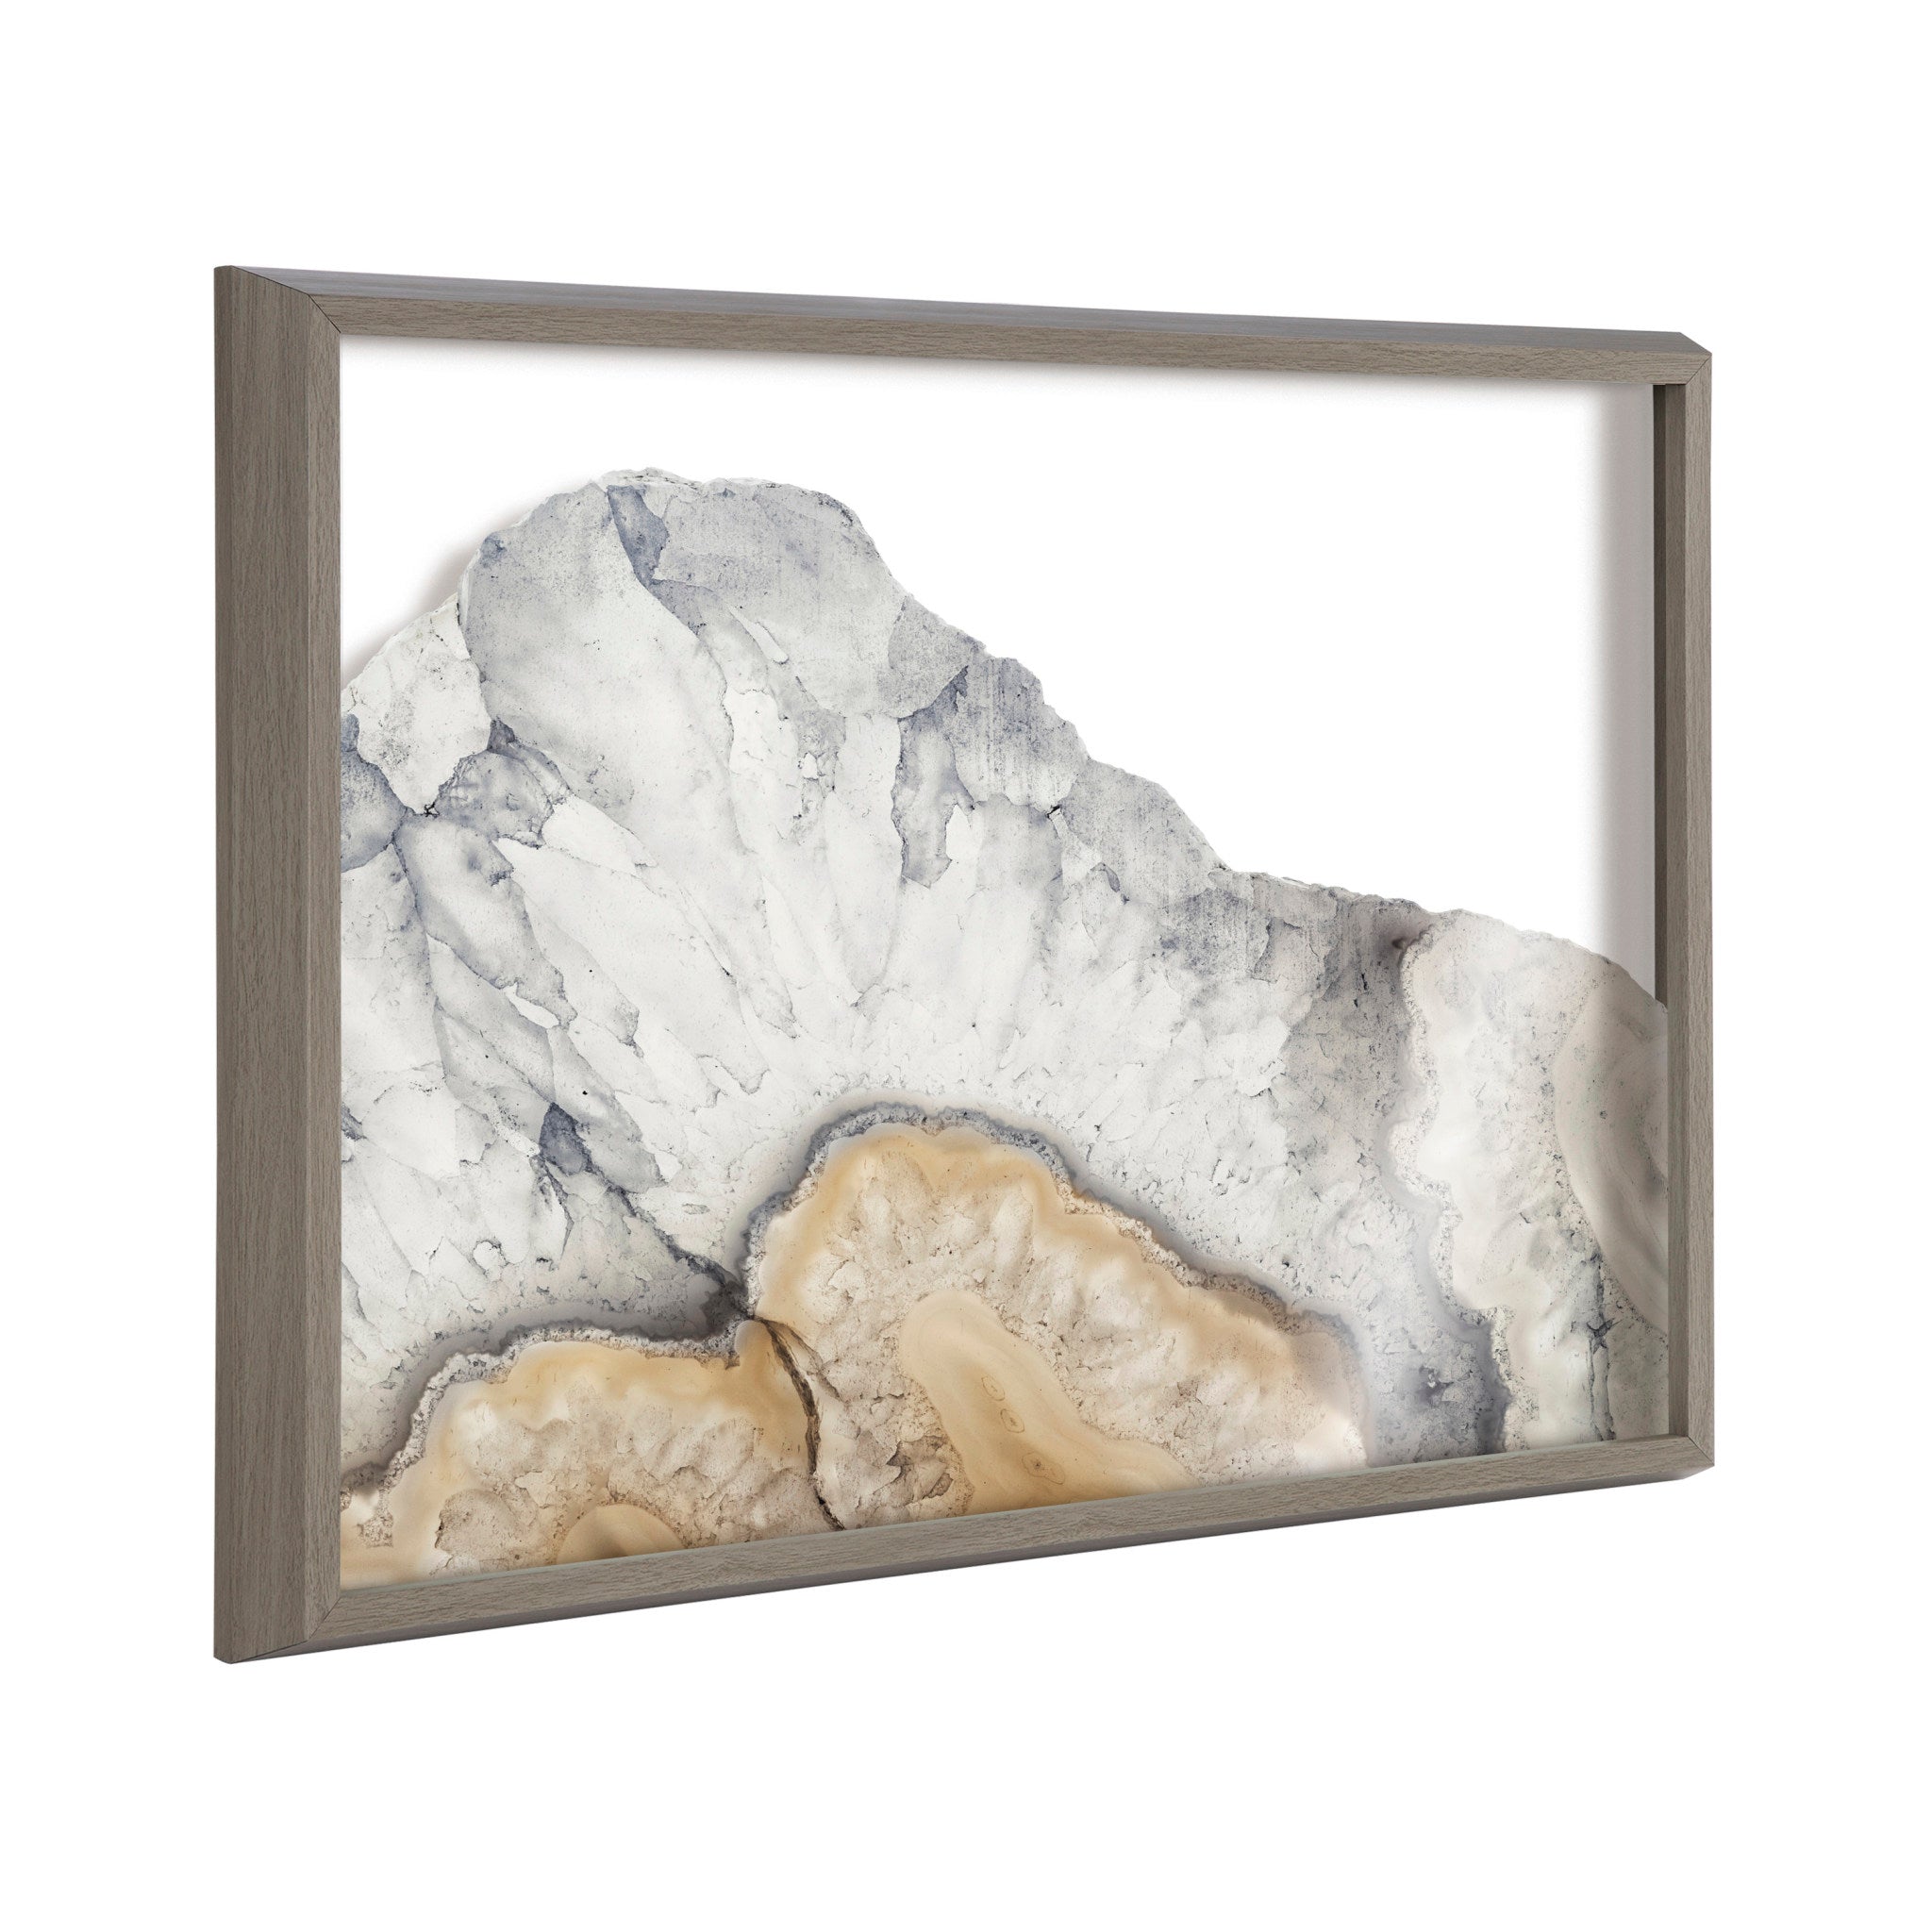 Blake Elements of Old II Framed Printed Glass by Emiko and Mark Franzen of F2Images